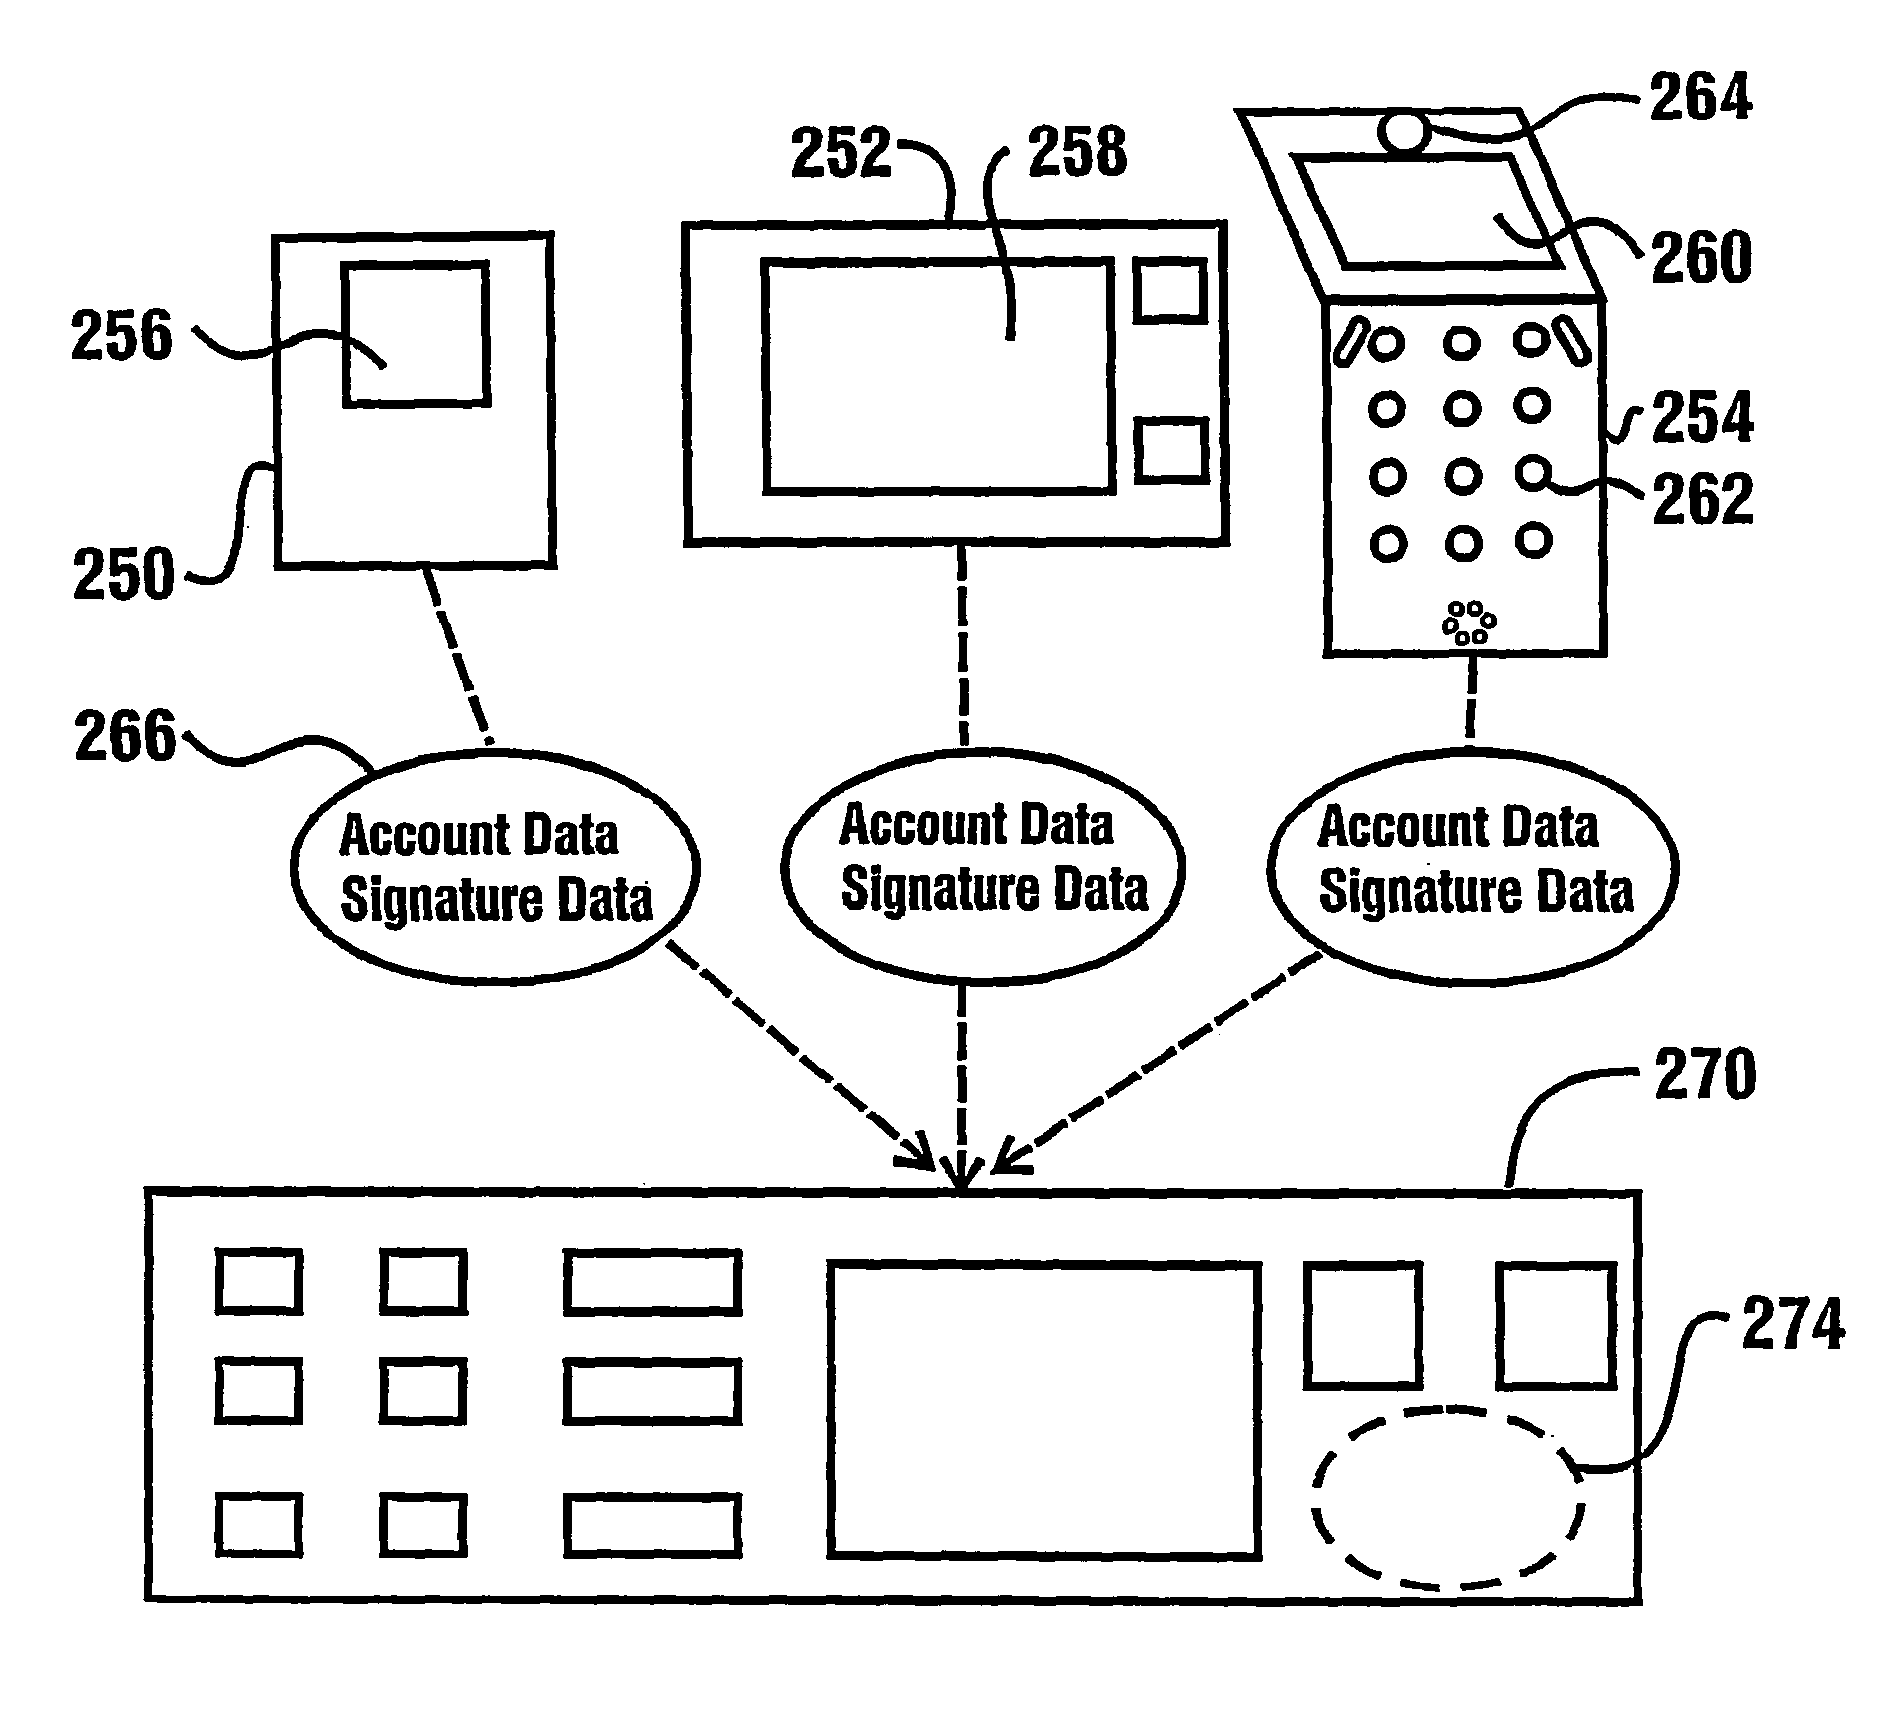 Banking system controlled responsive to data bearing records